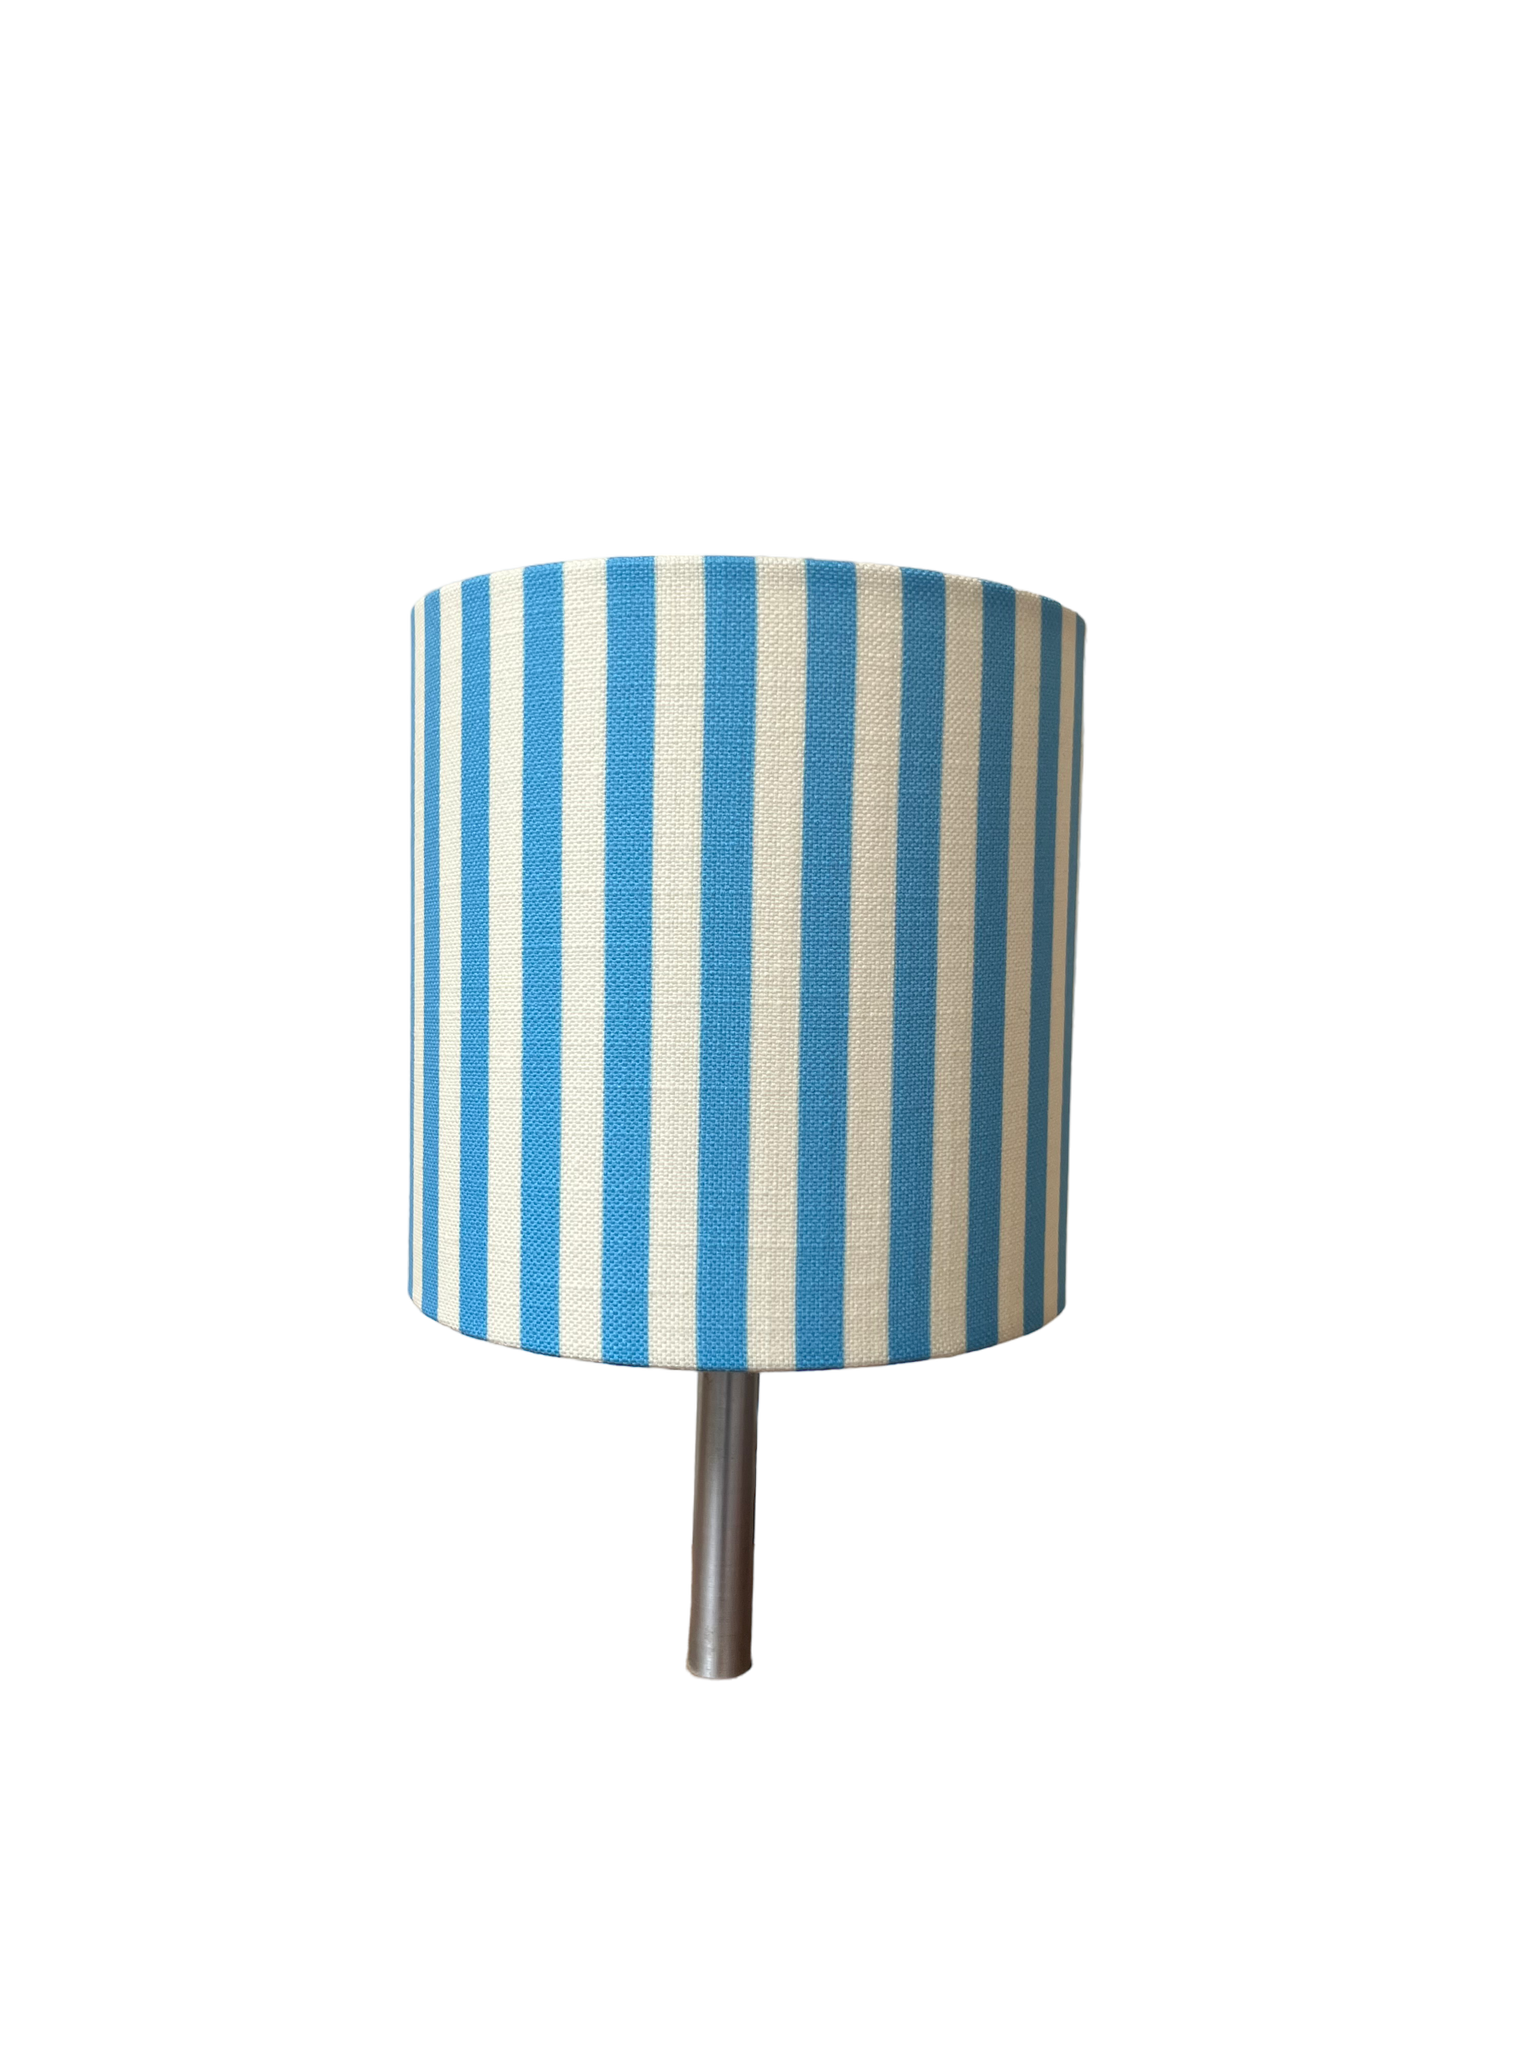 Baby Lampshade - Blue Skies & Coconut